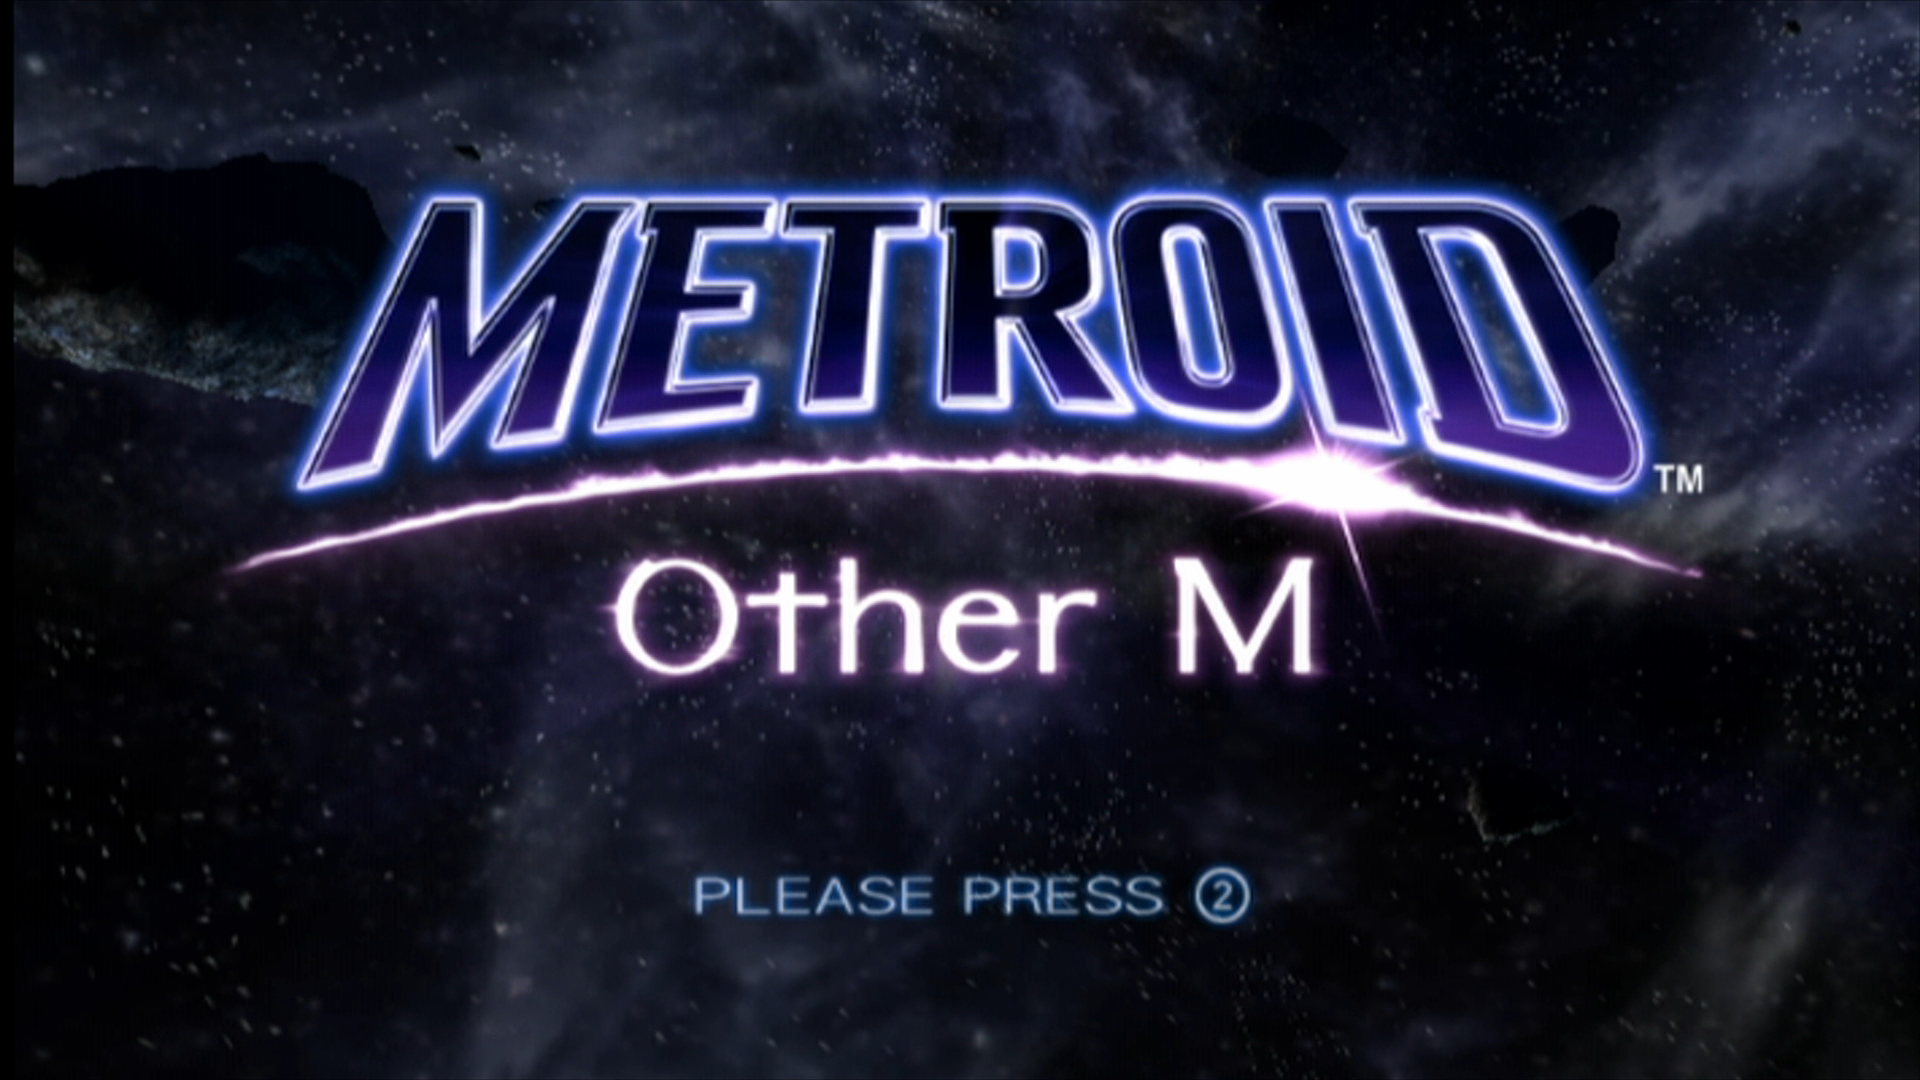  'Metroid: Other M' title screen